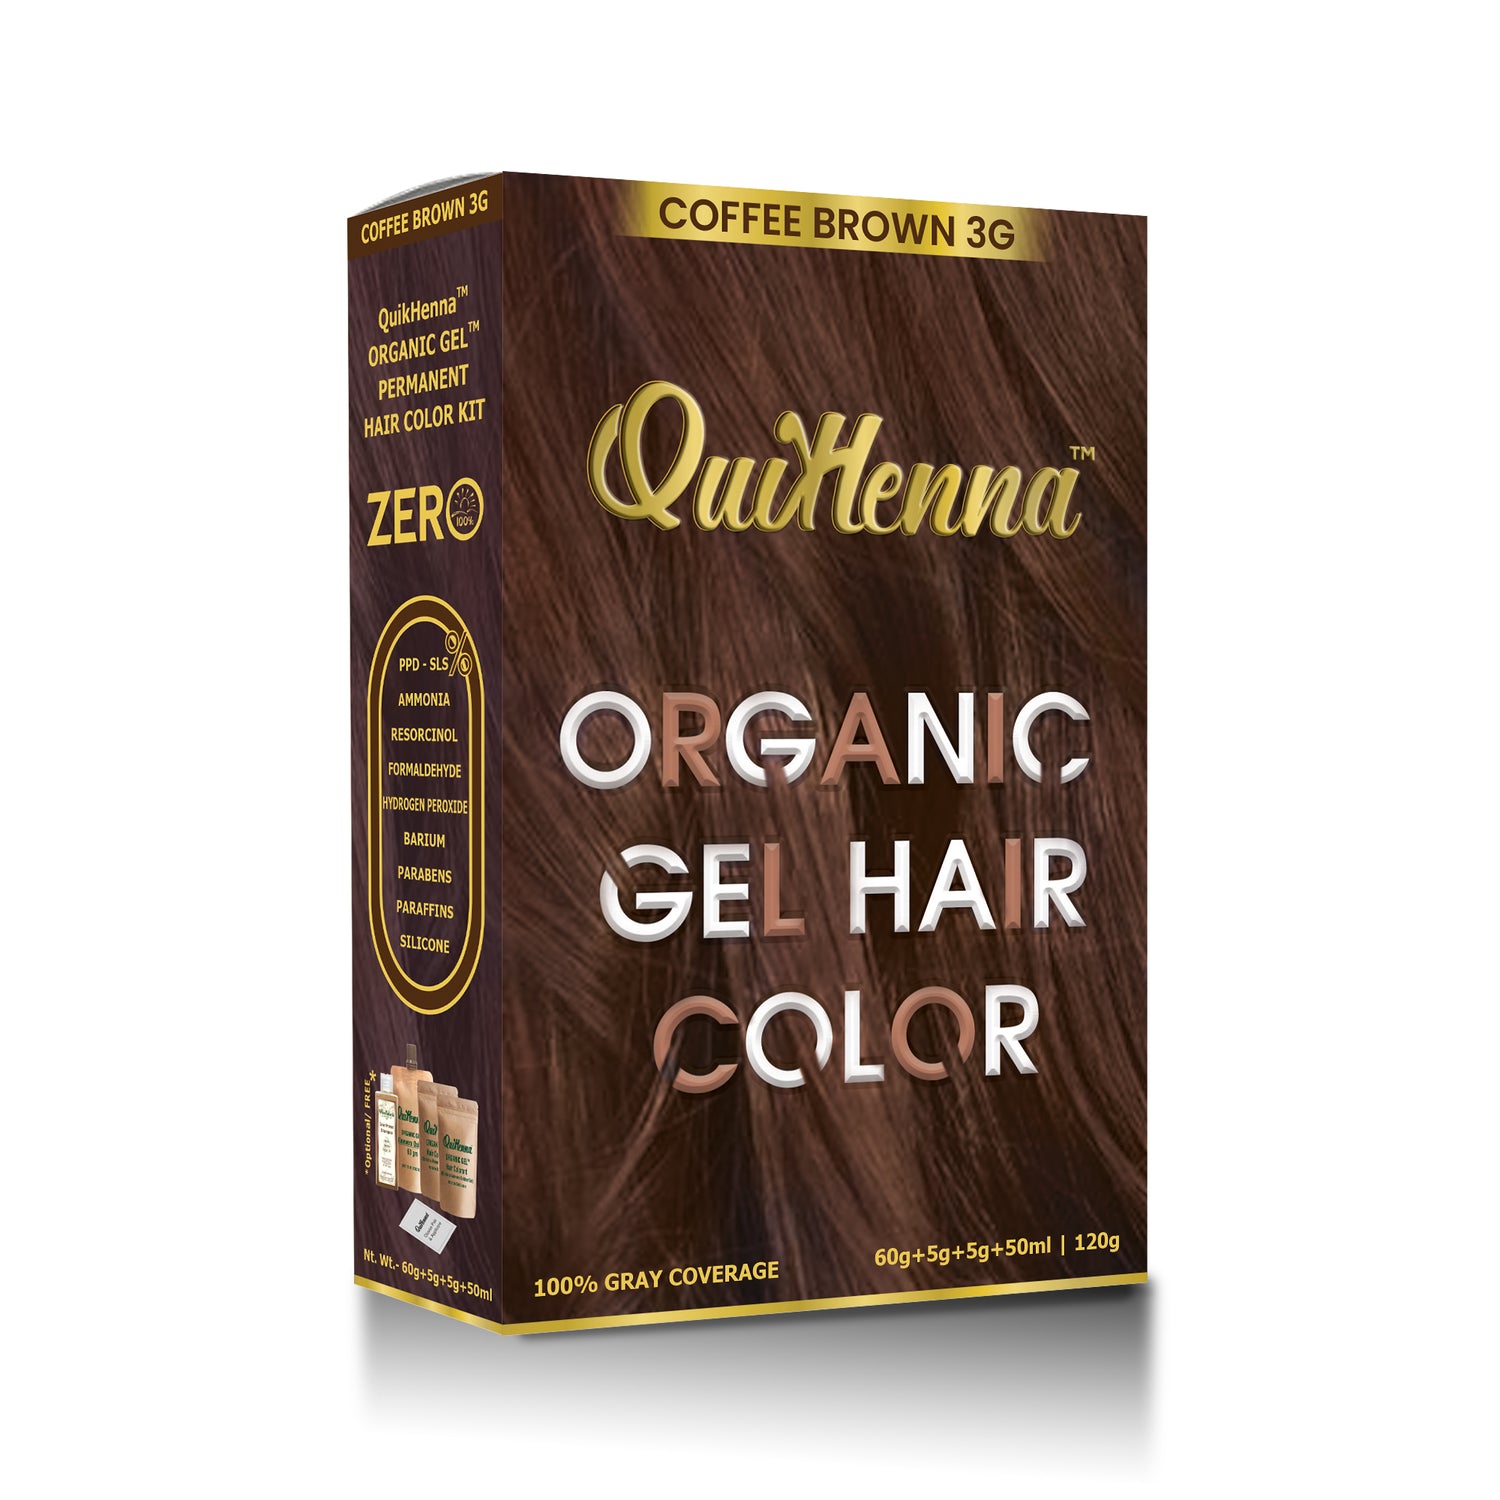 QuikHenna Organic Gel Hair Colour for men and women coffee brown ammonia and ppd free color